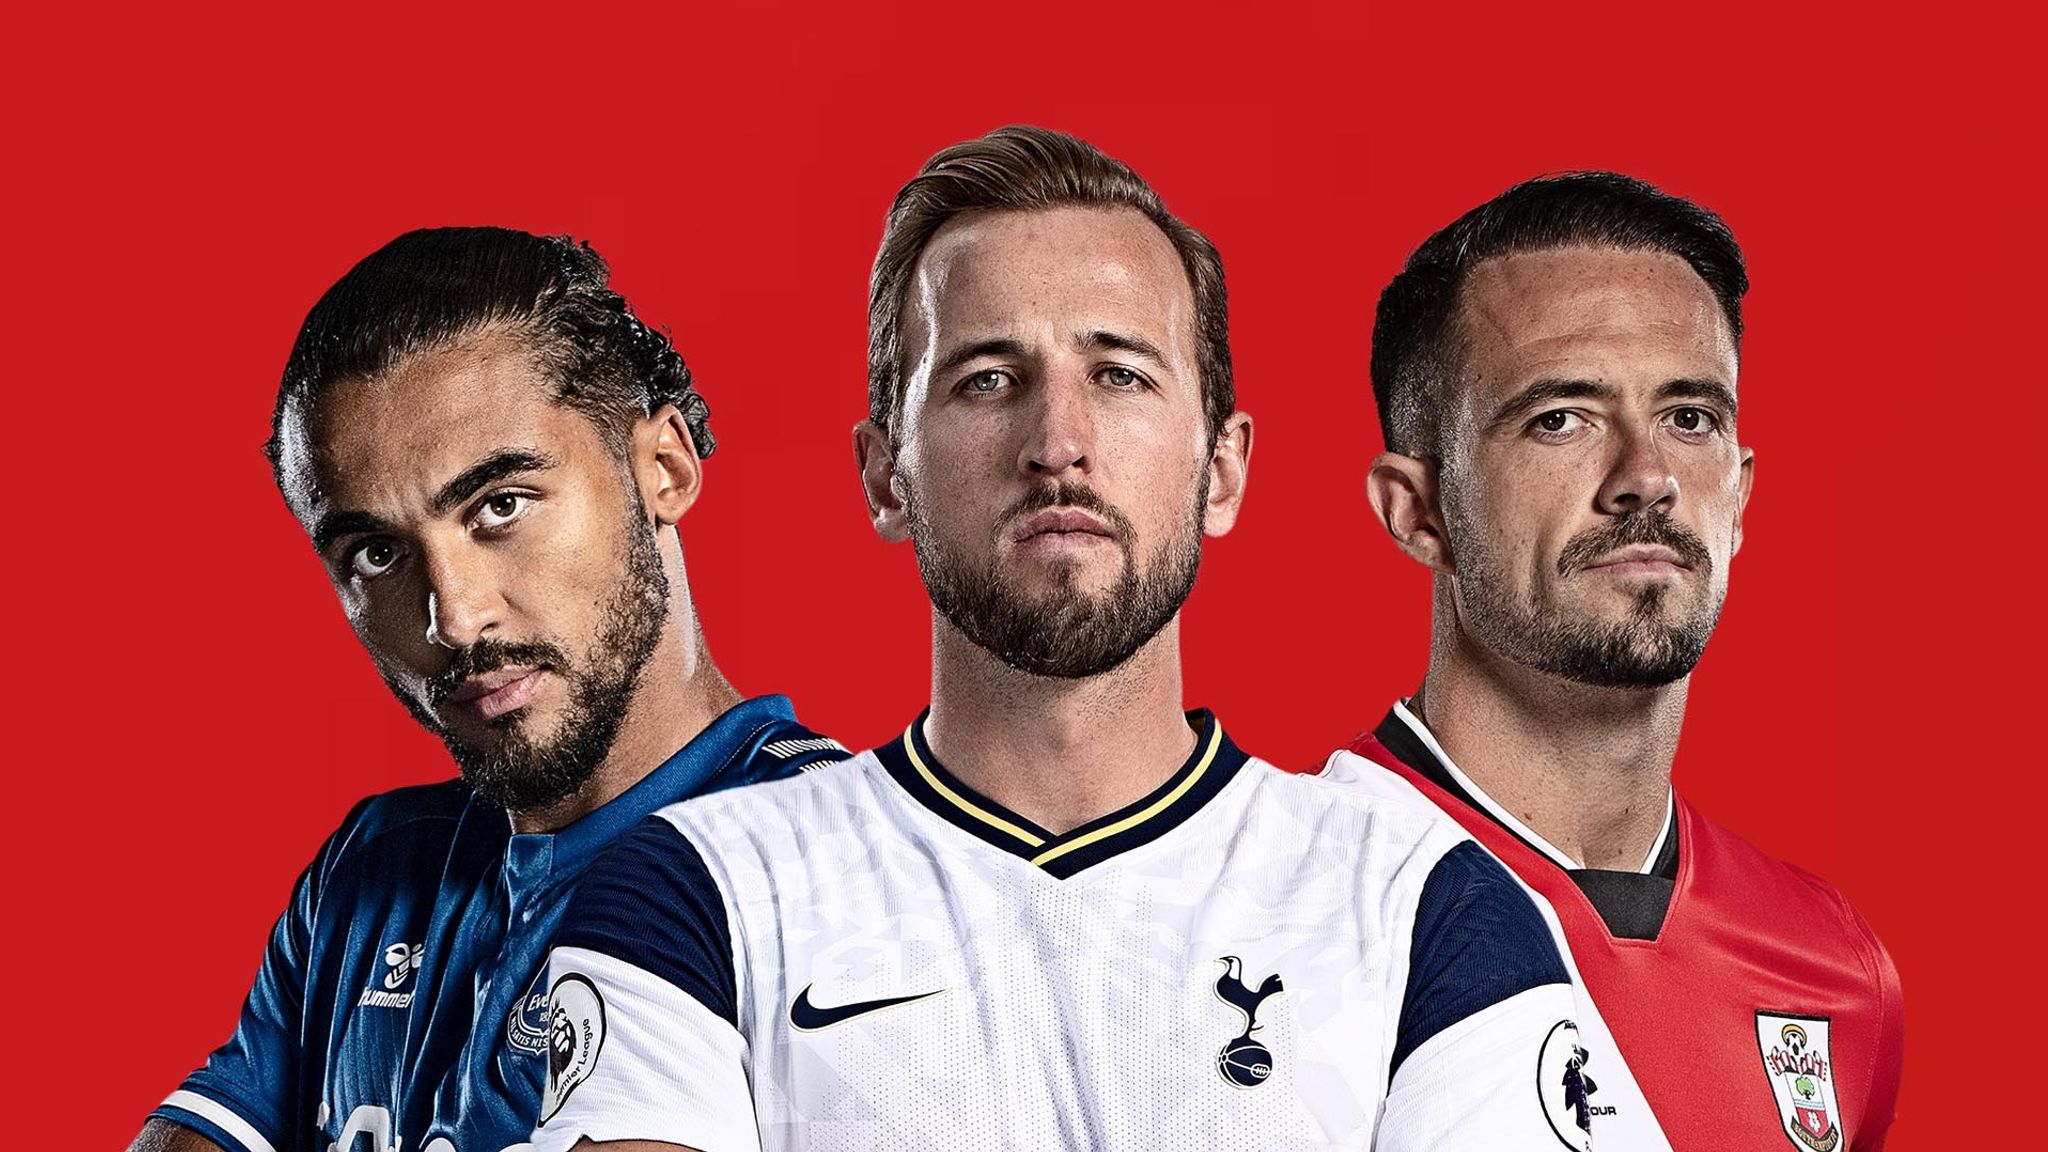 England's best forwards for a generation? How the English striker is flourishing again in the Premier League | Football | Sky Sports